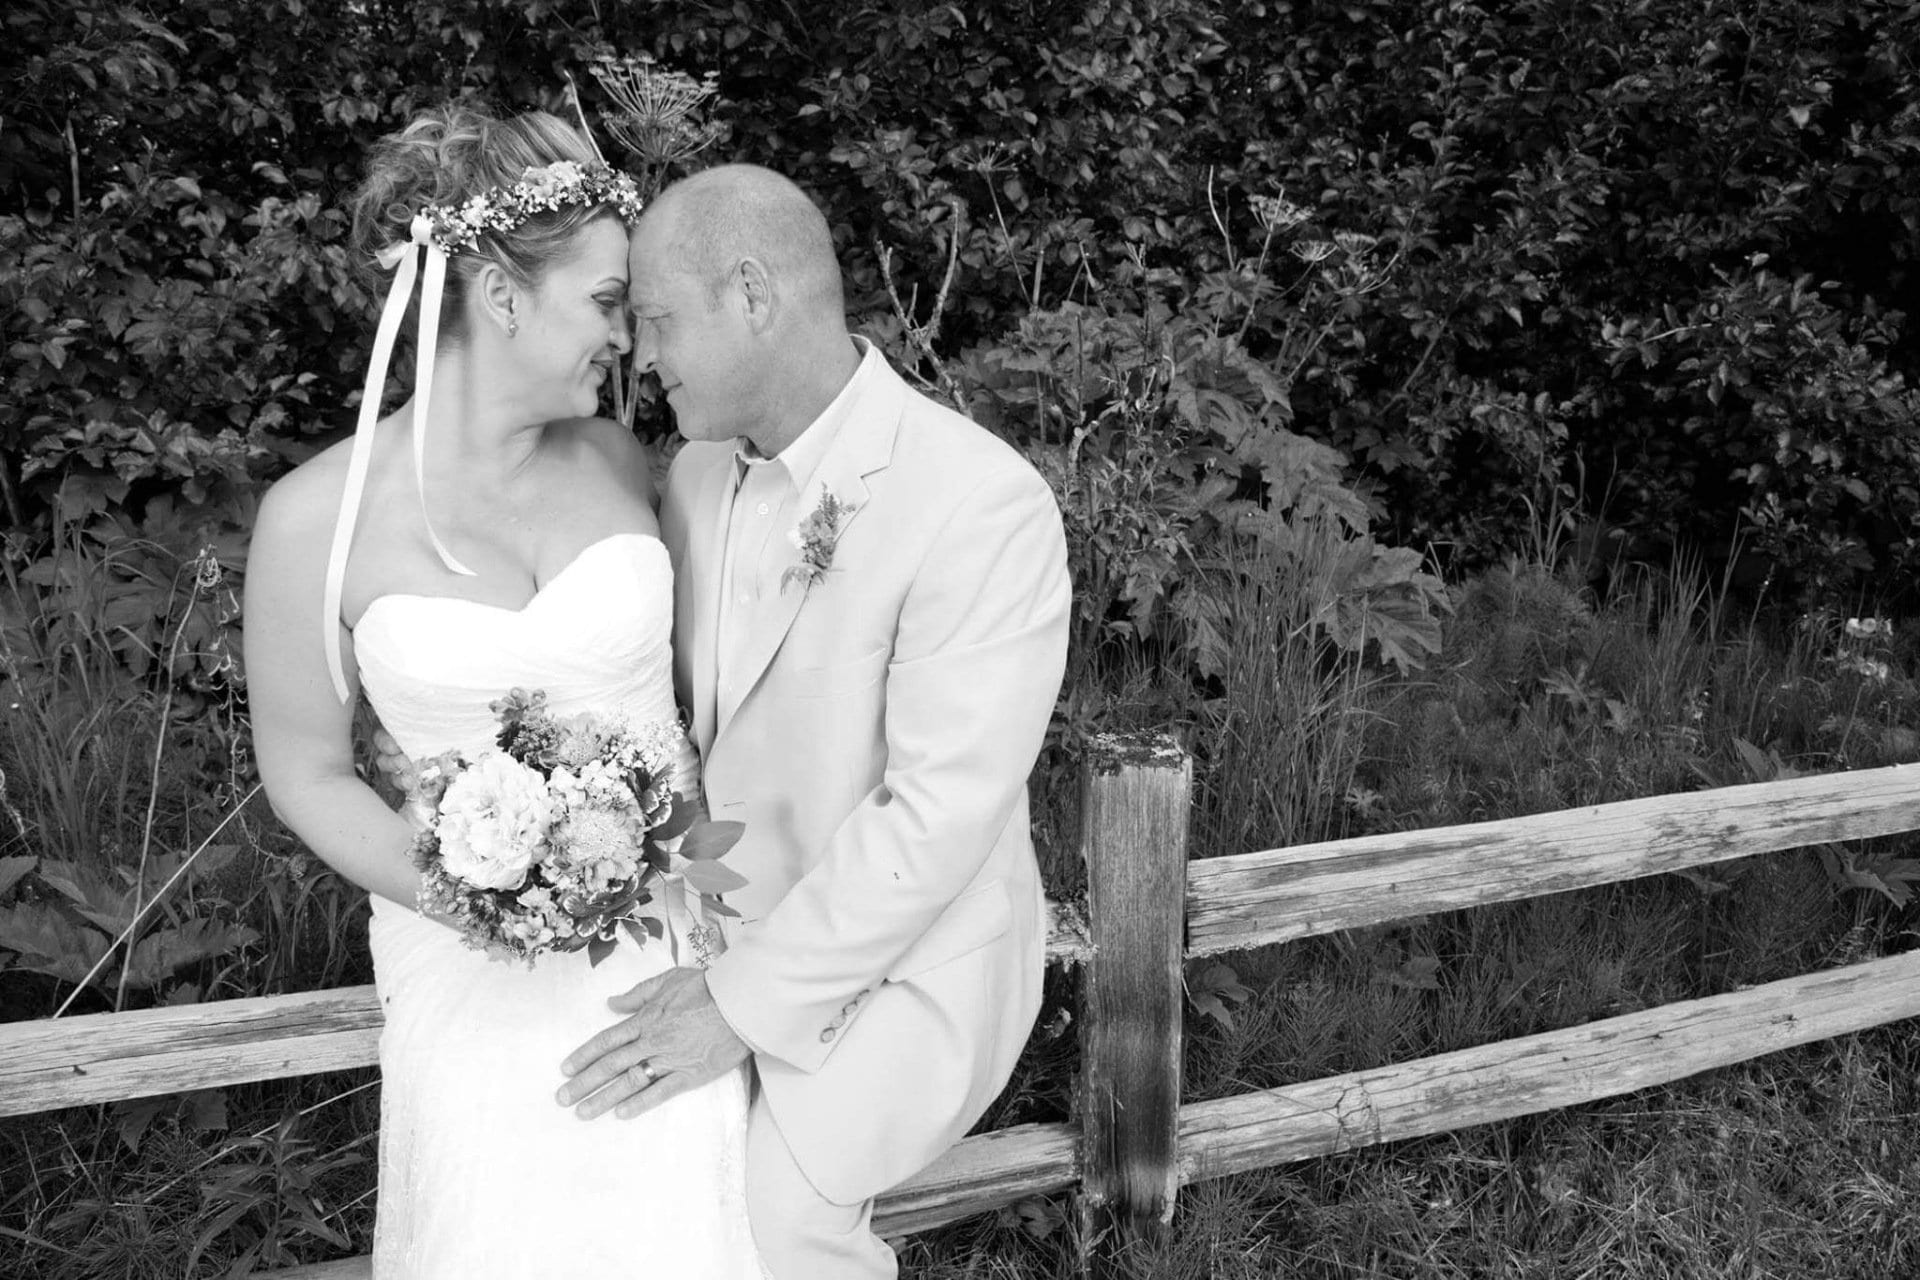 Black and white image of a newlywed couple flirting while sitting together on a rustic fence